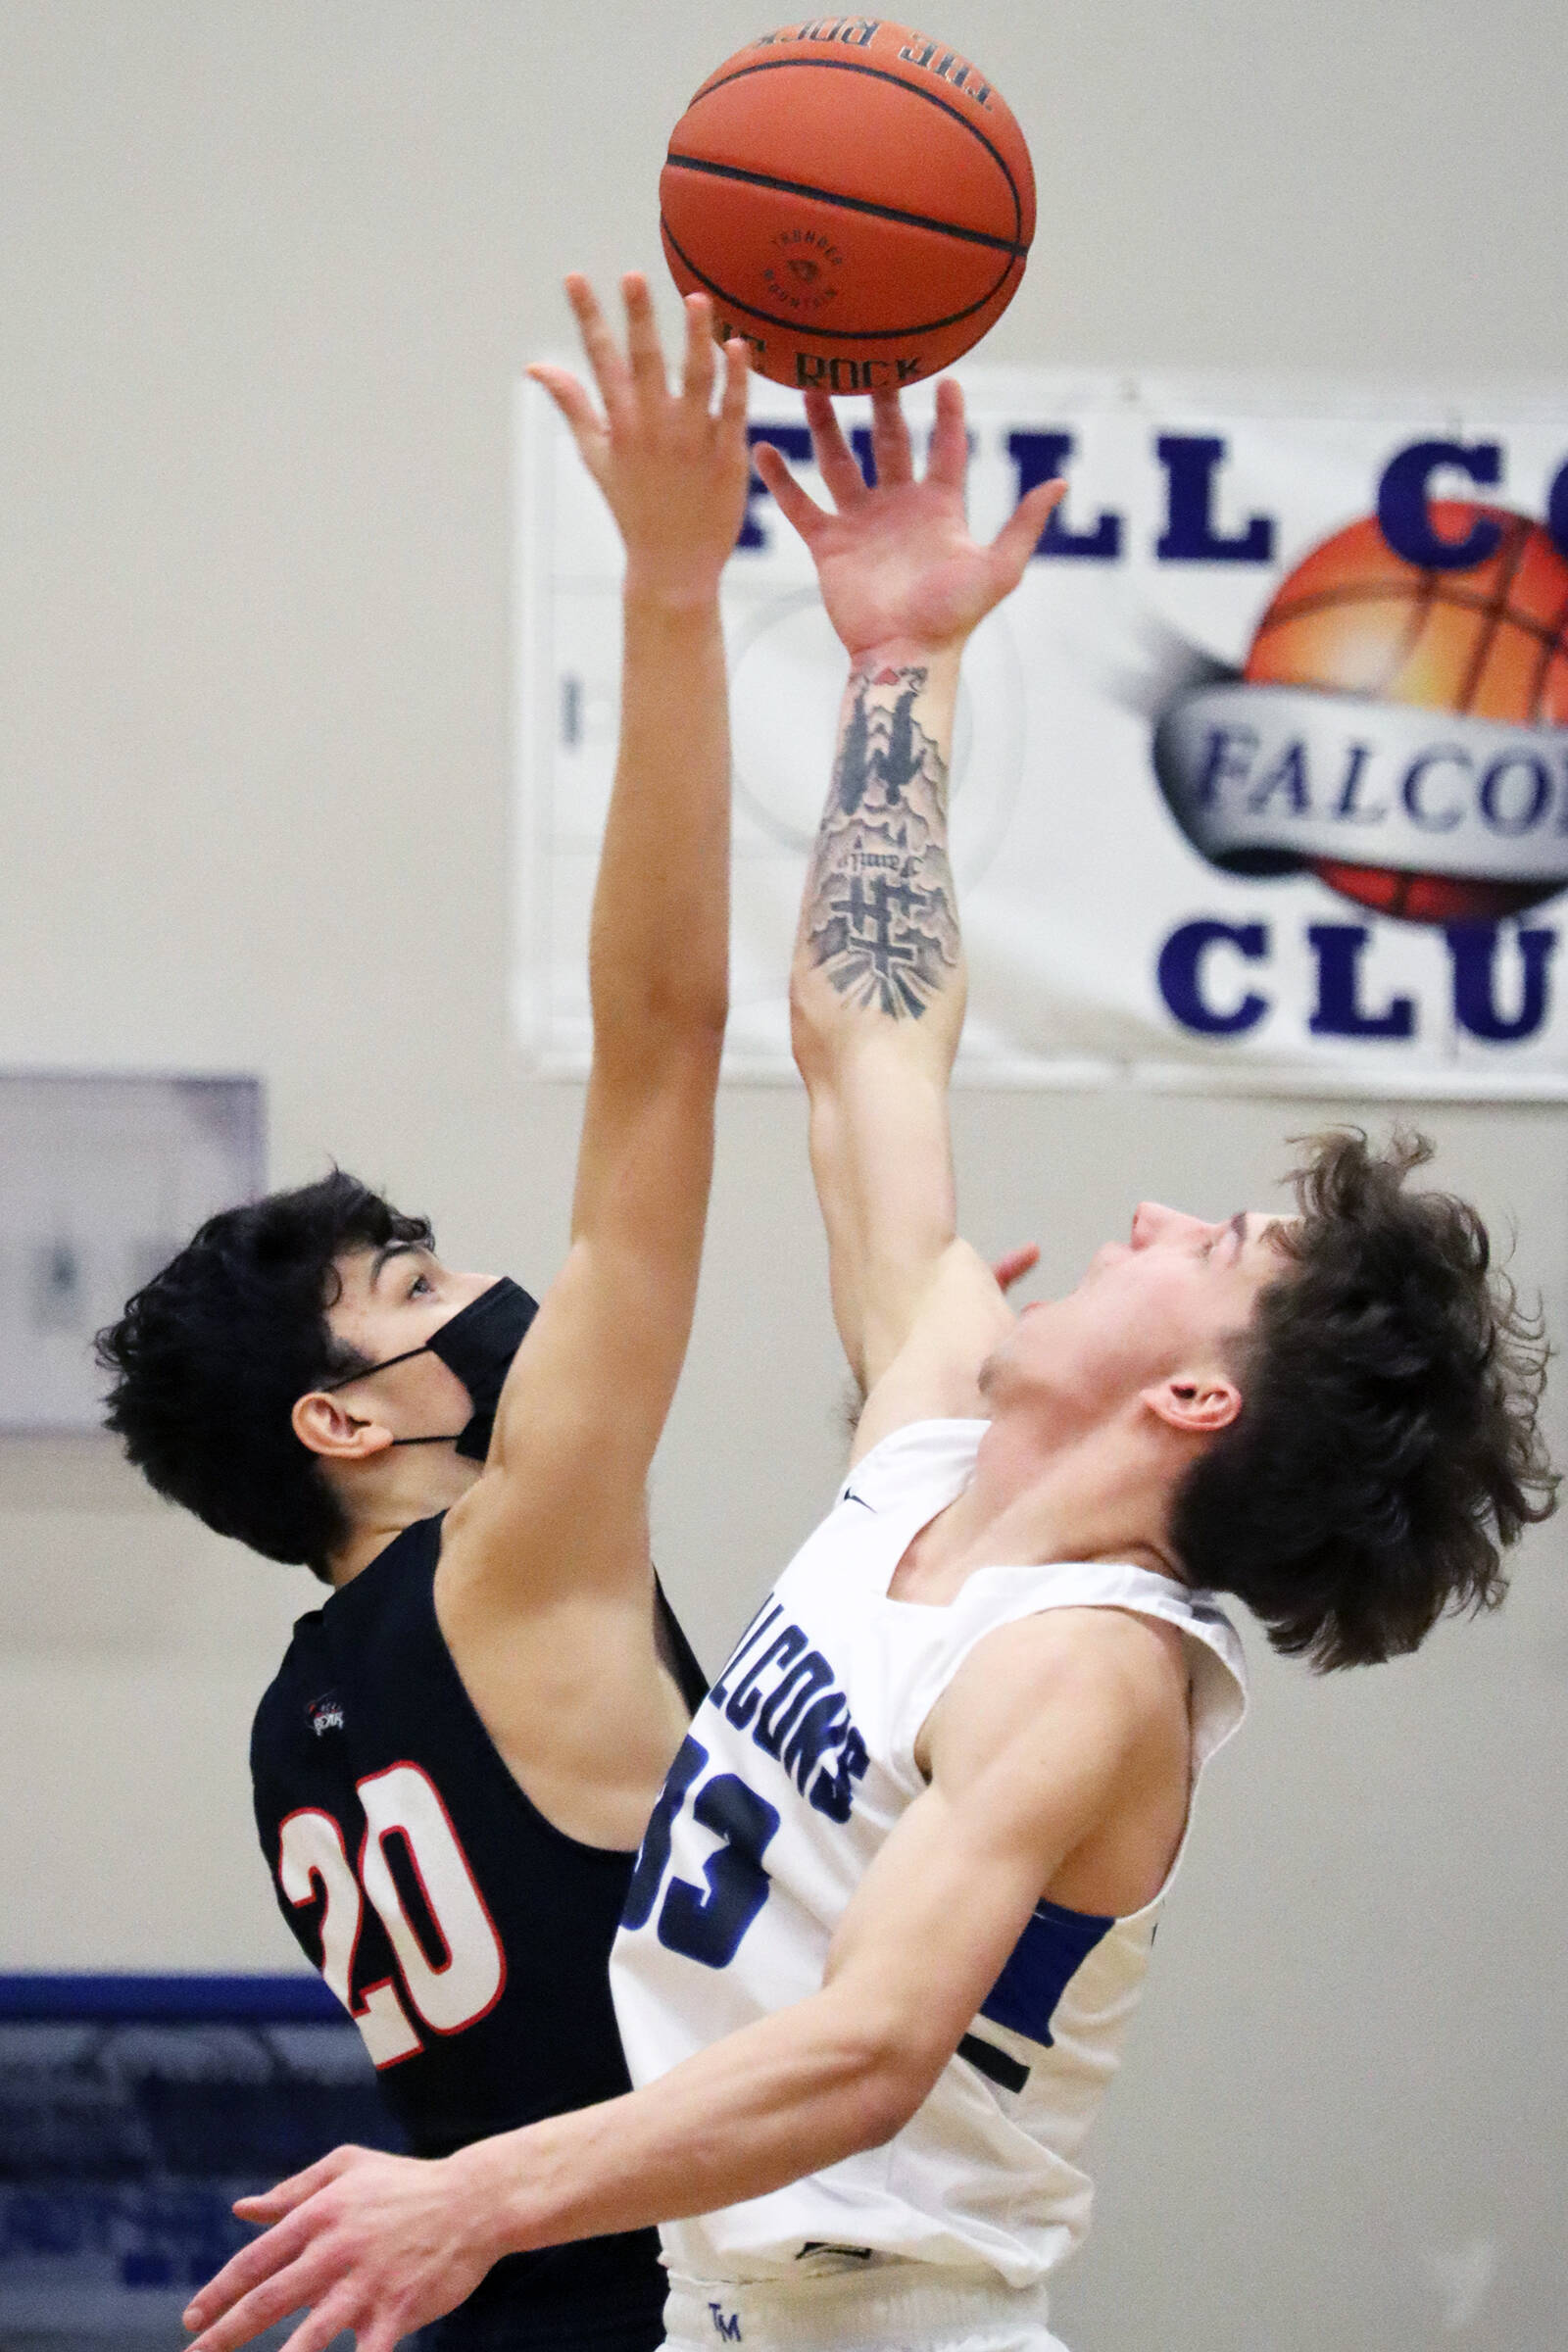 Orion Dybdahl and Thomas Baxter jump during tipoff in an earlier game between JDHS and TMHS. The two schools will meet again on Friday and Saturday. The games will have Region V Tournament seeding implications for JDHS. (Ben Hohenstatt / Juneau Empire File)